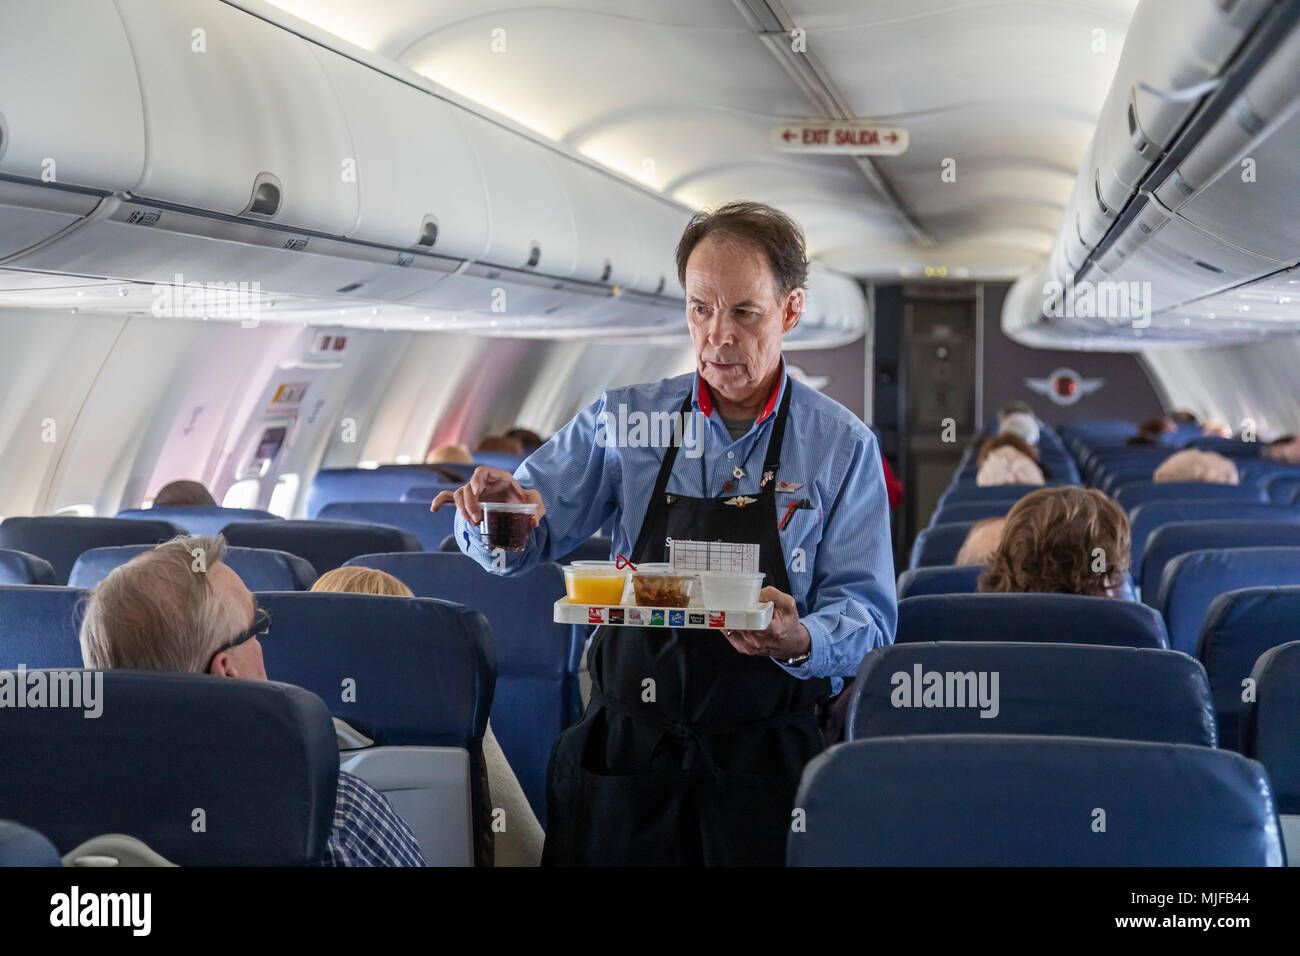 How can i become a flight attendant for southwest airlines Detroit Michigan A Flight Attendant Serves Drinks On A Southwest Airlines Flight From Detroit To Atlanta Stock Photo Alamy